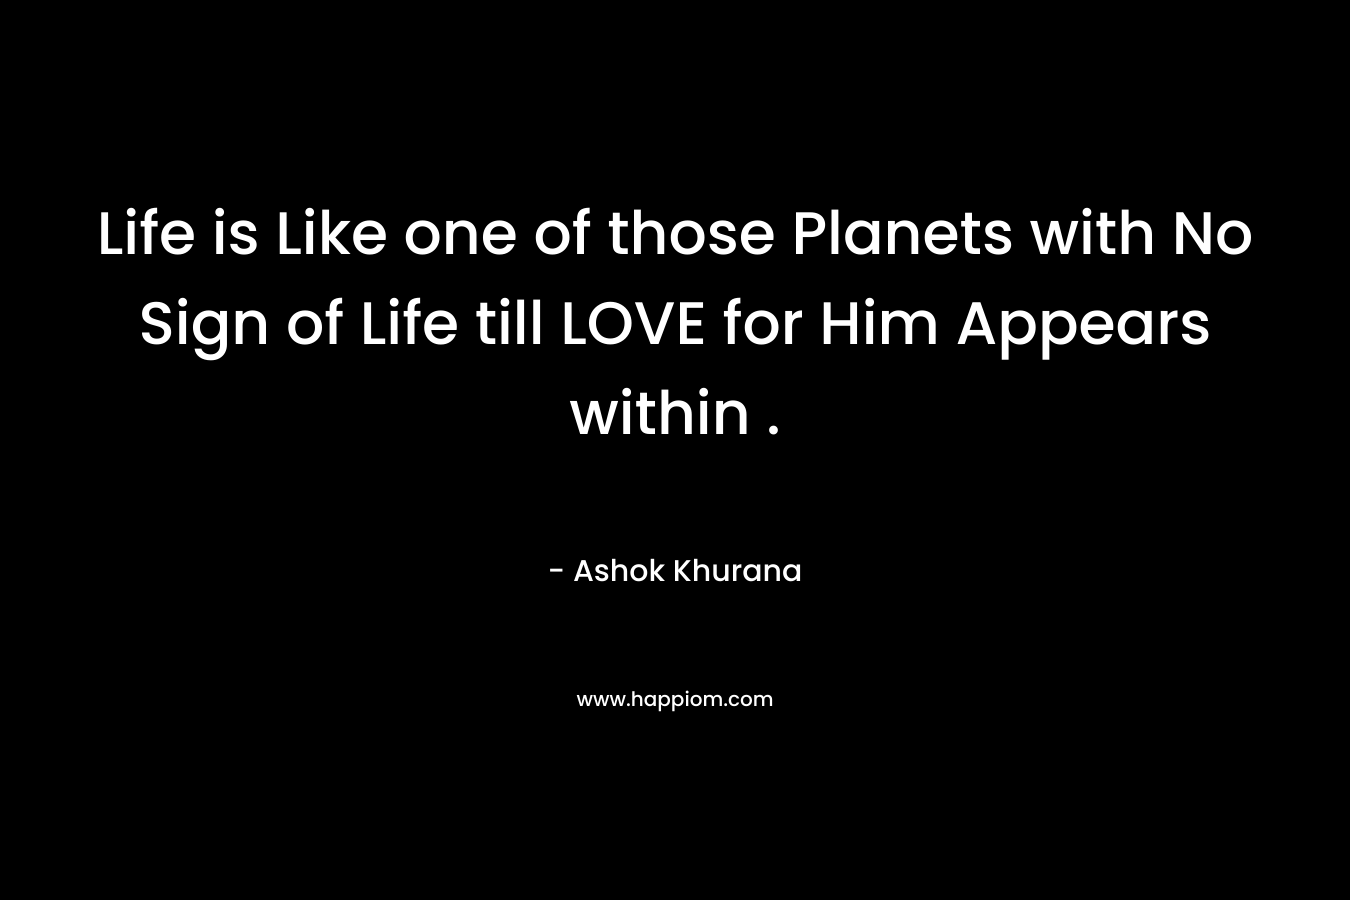 Life is Like one of those Planets with No Sign of Life till LOVE for Him Appears within .